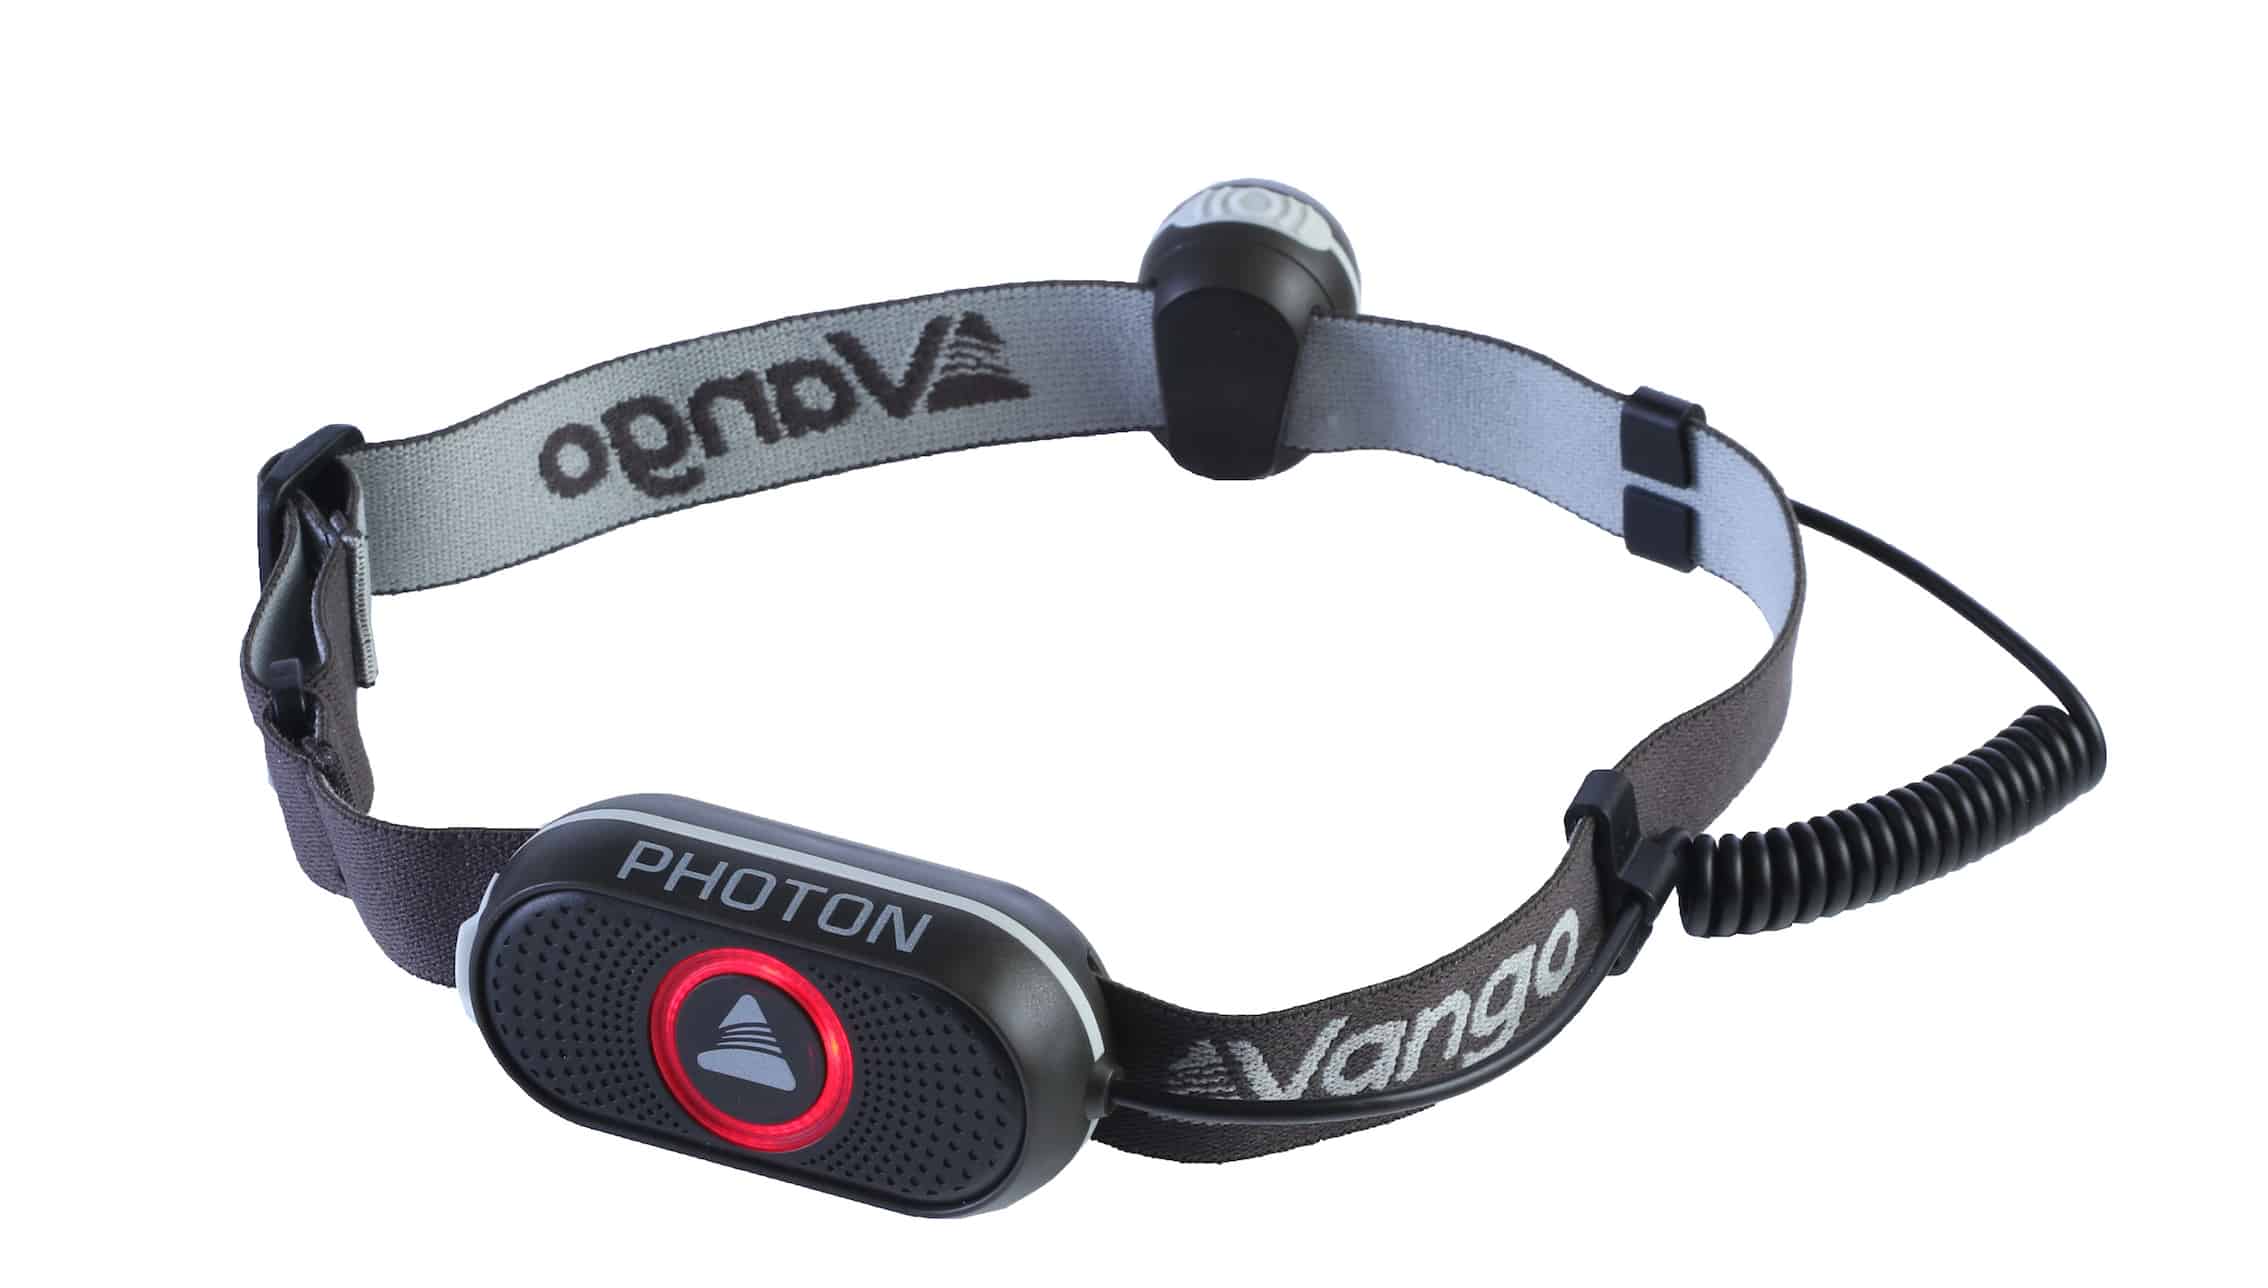 Head Torch Review - Vango Photon USB head torch - The Family Freestylers